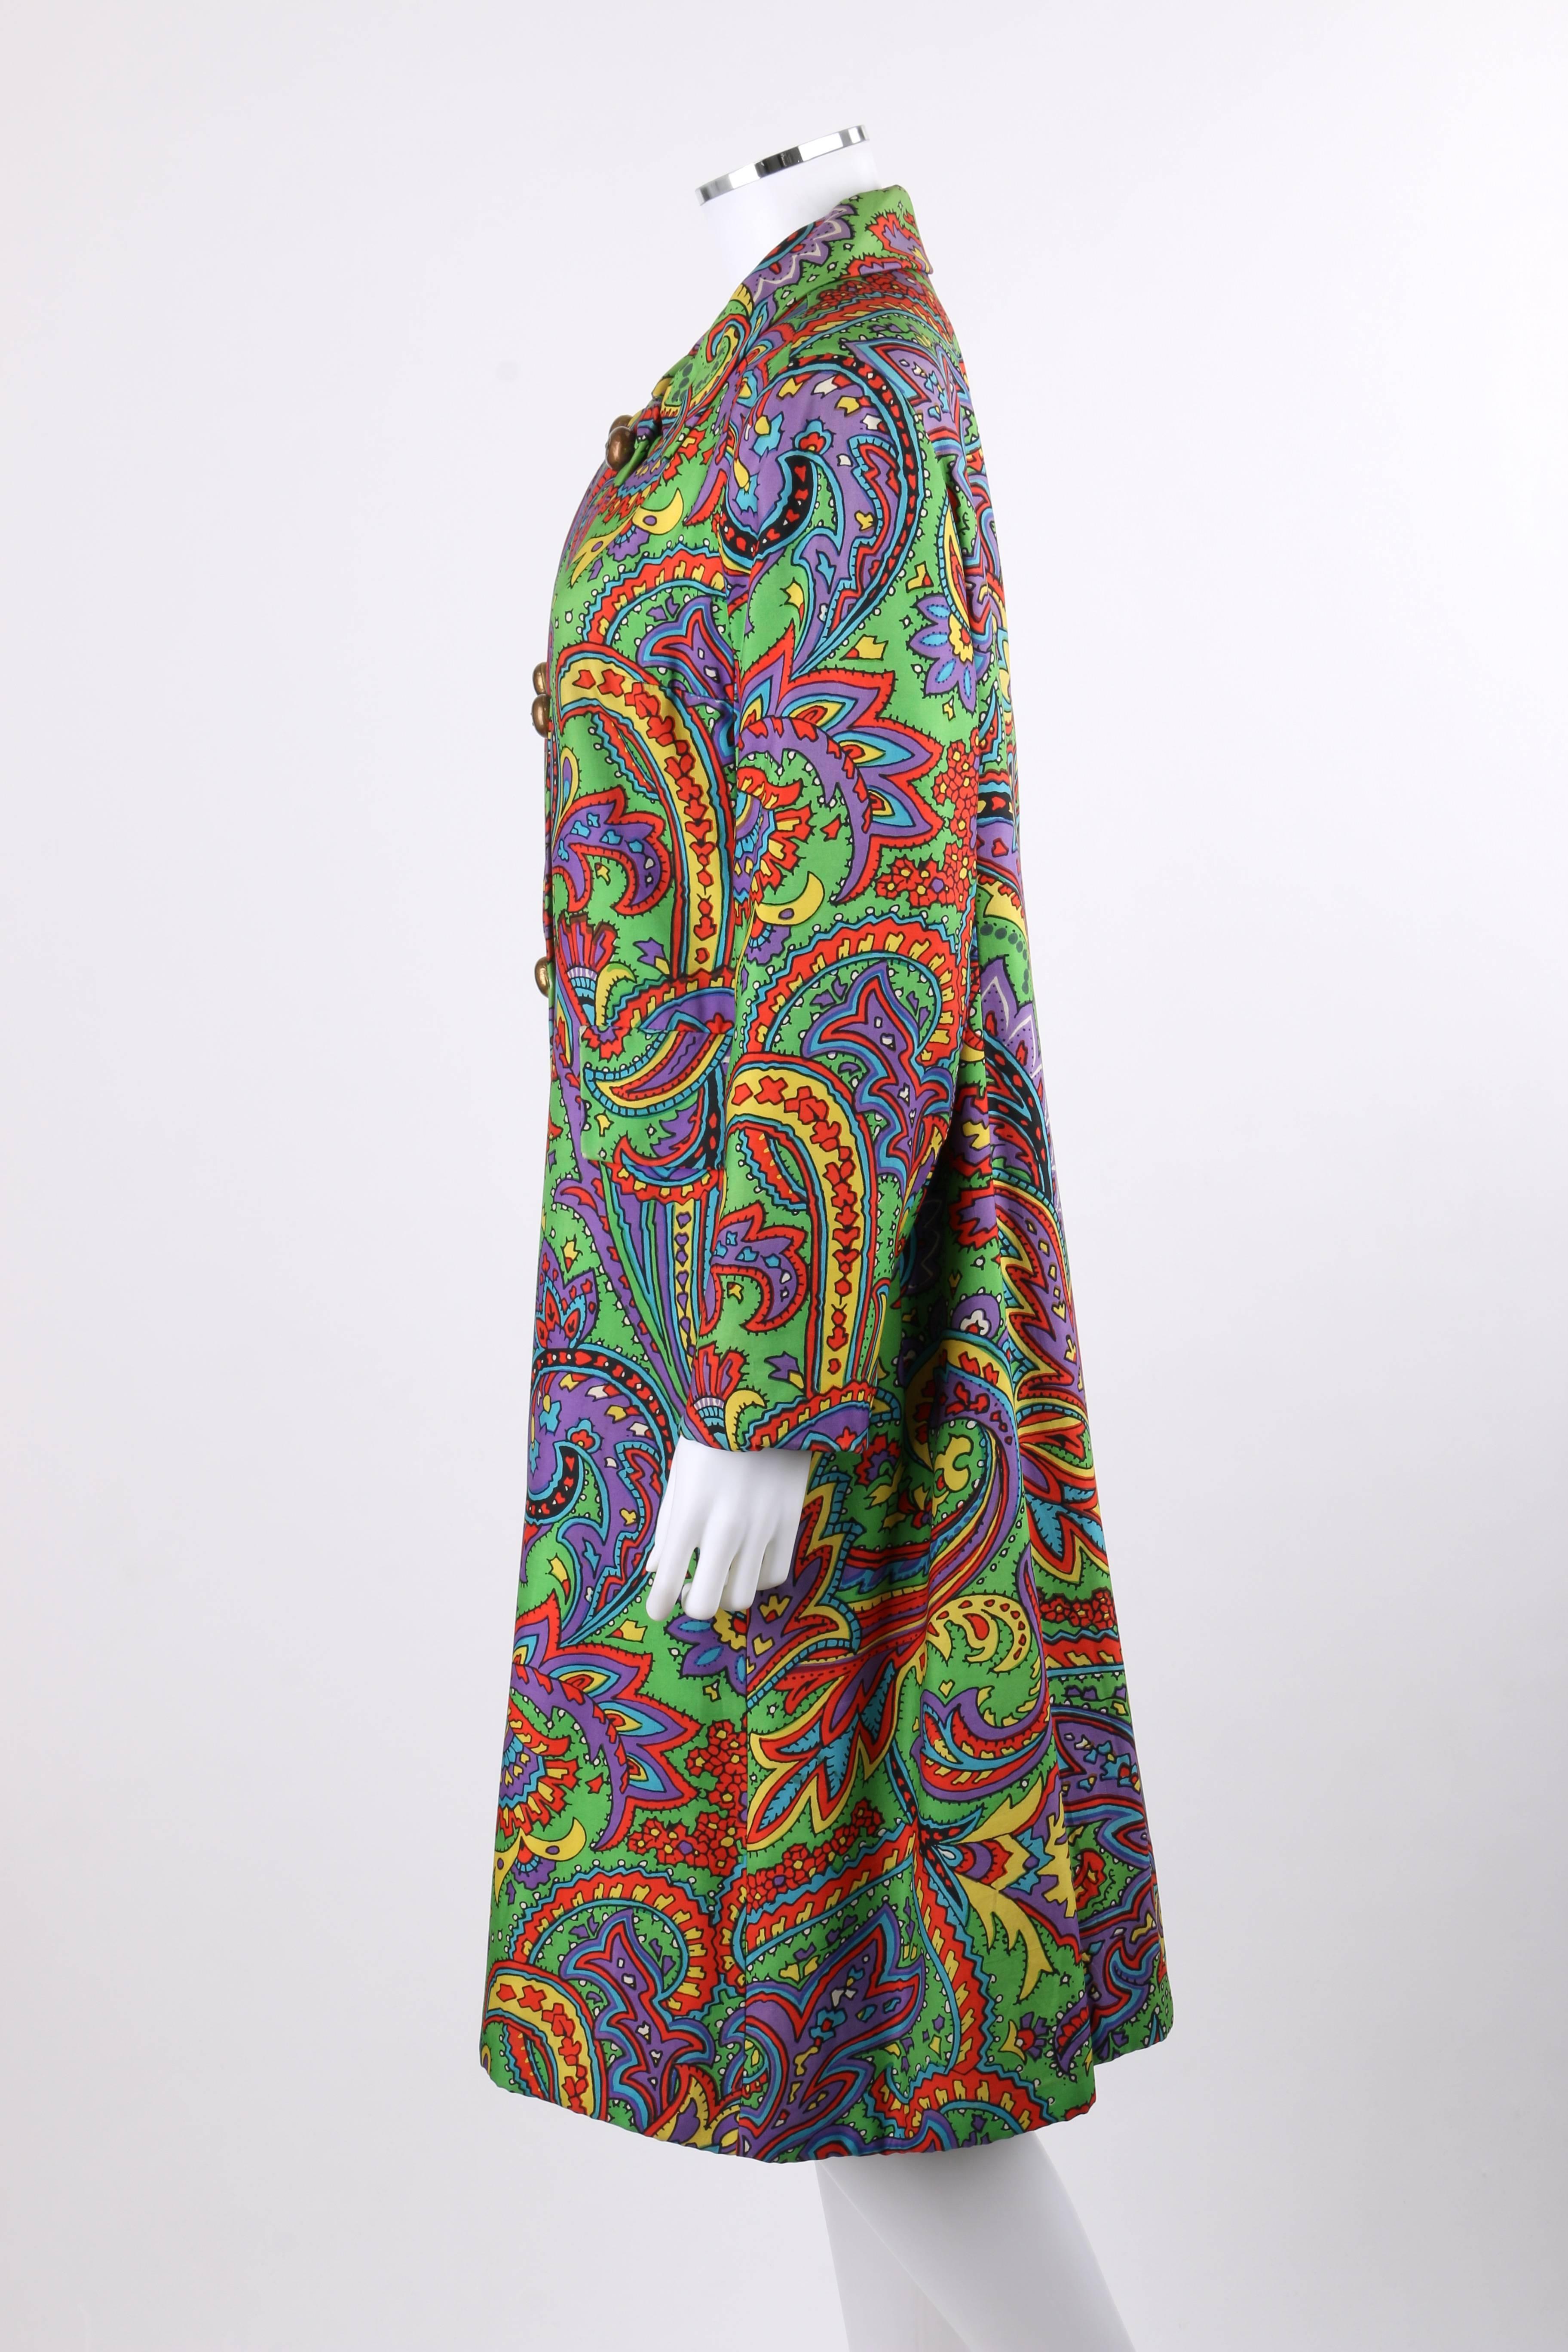 Gray BILL BLASS For Bond Street c.1970s Multicolor Paisley Print Double Breasted Coat